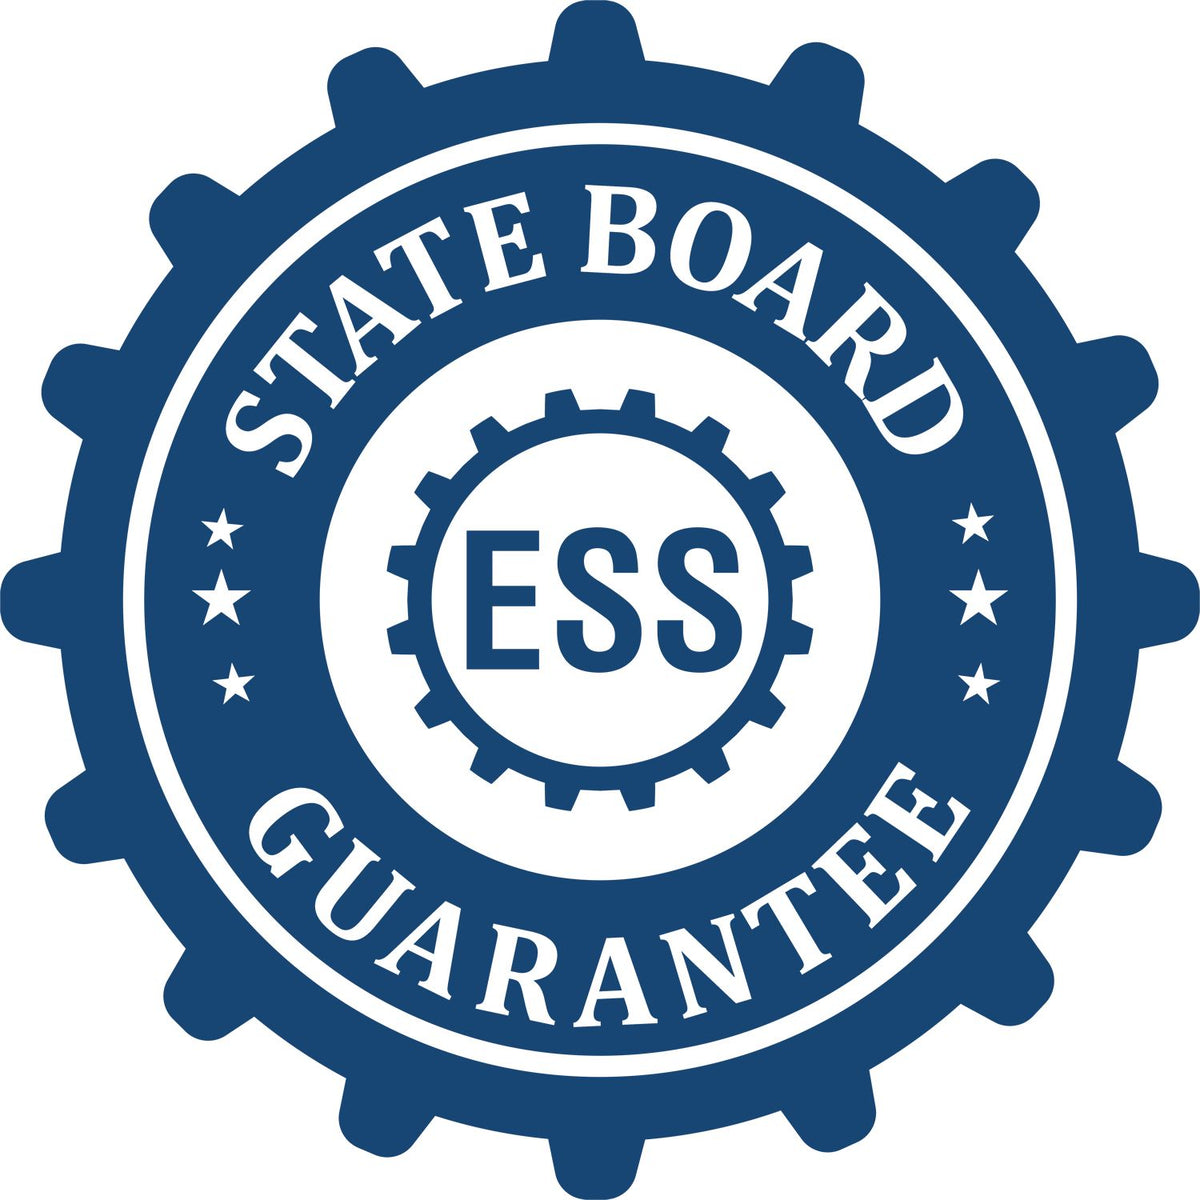 An emblem in a gear shape illustrating a state board guarantee for the New Hampshire Professional Geologist Seal Stamp